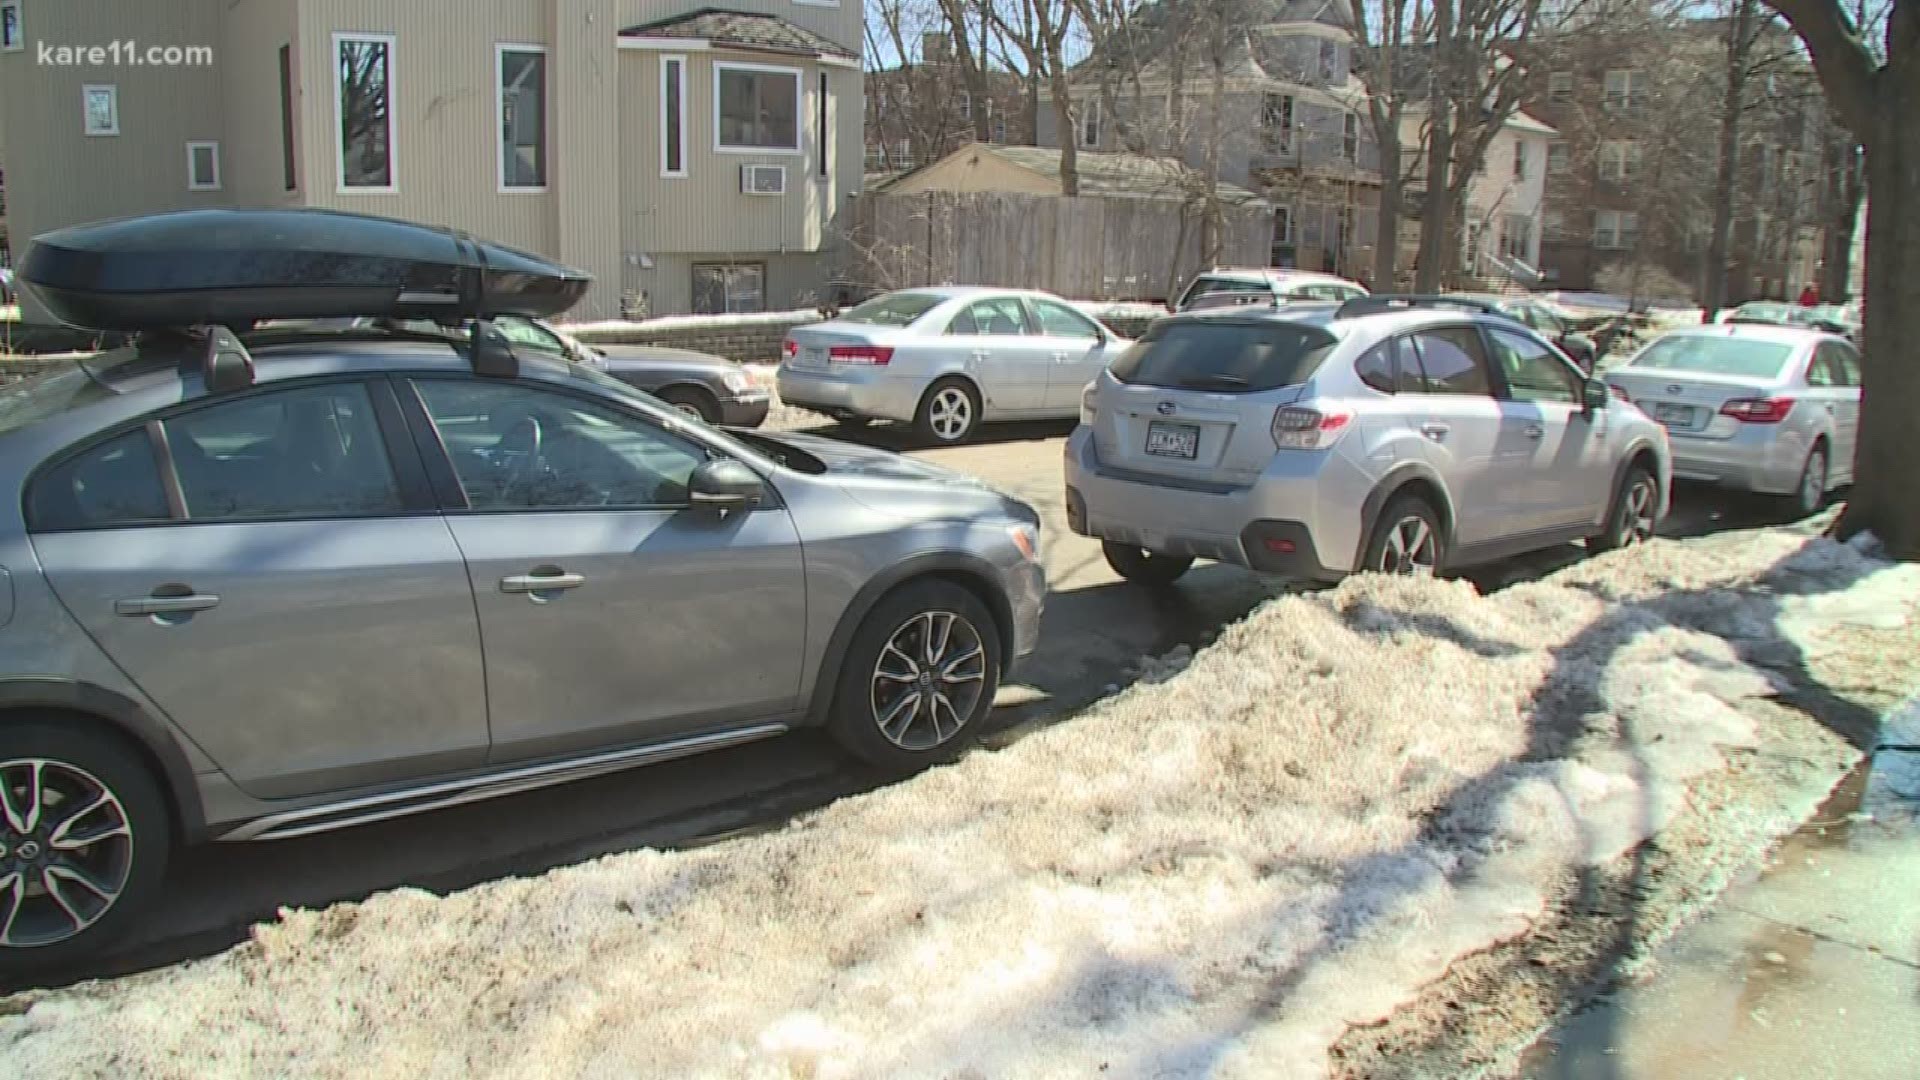 Both Minneapolis and St. Paul have lifted their winter parking restrictions, just in time for spring.